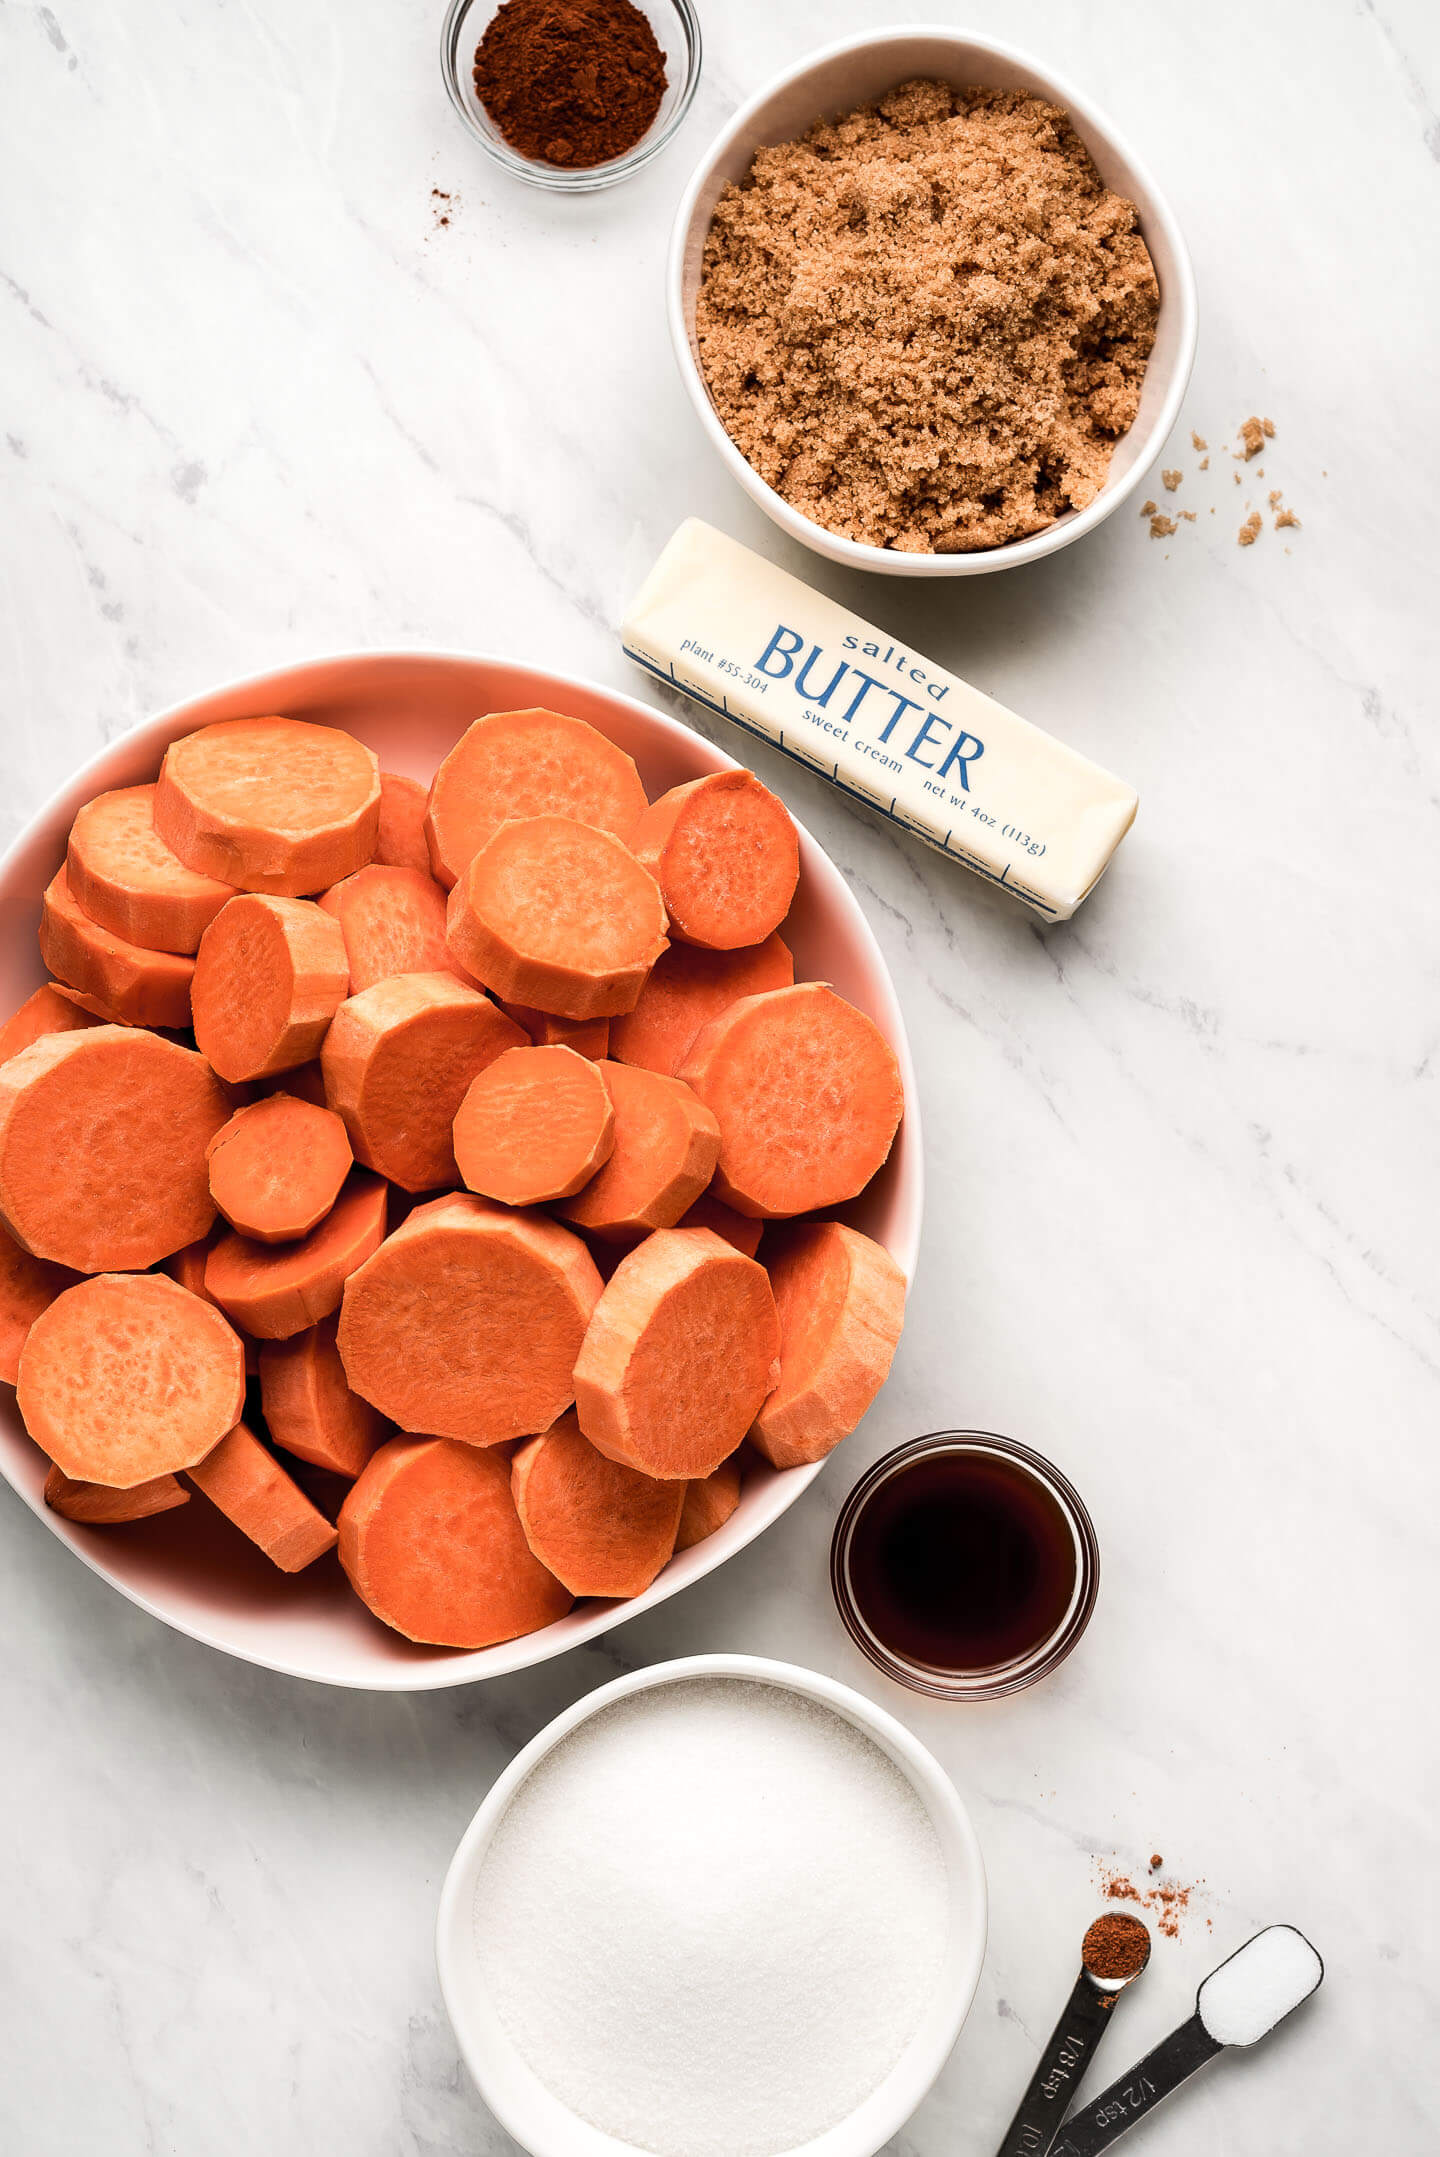 Ingredients on a marble surface- cinnamon, brown sugar, butter, sweet potatoes, vanilla extract, granulated sugar, nutmeg, and salt.